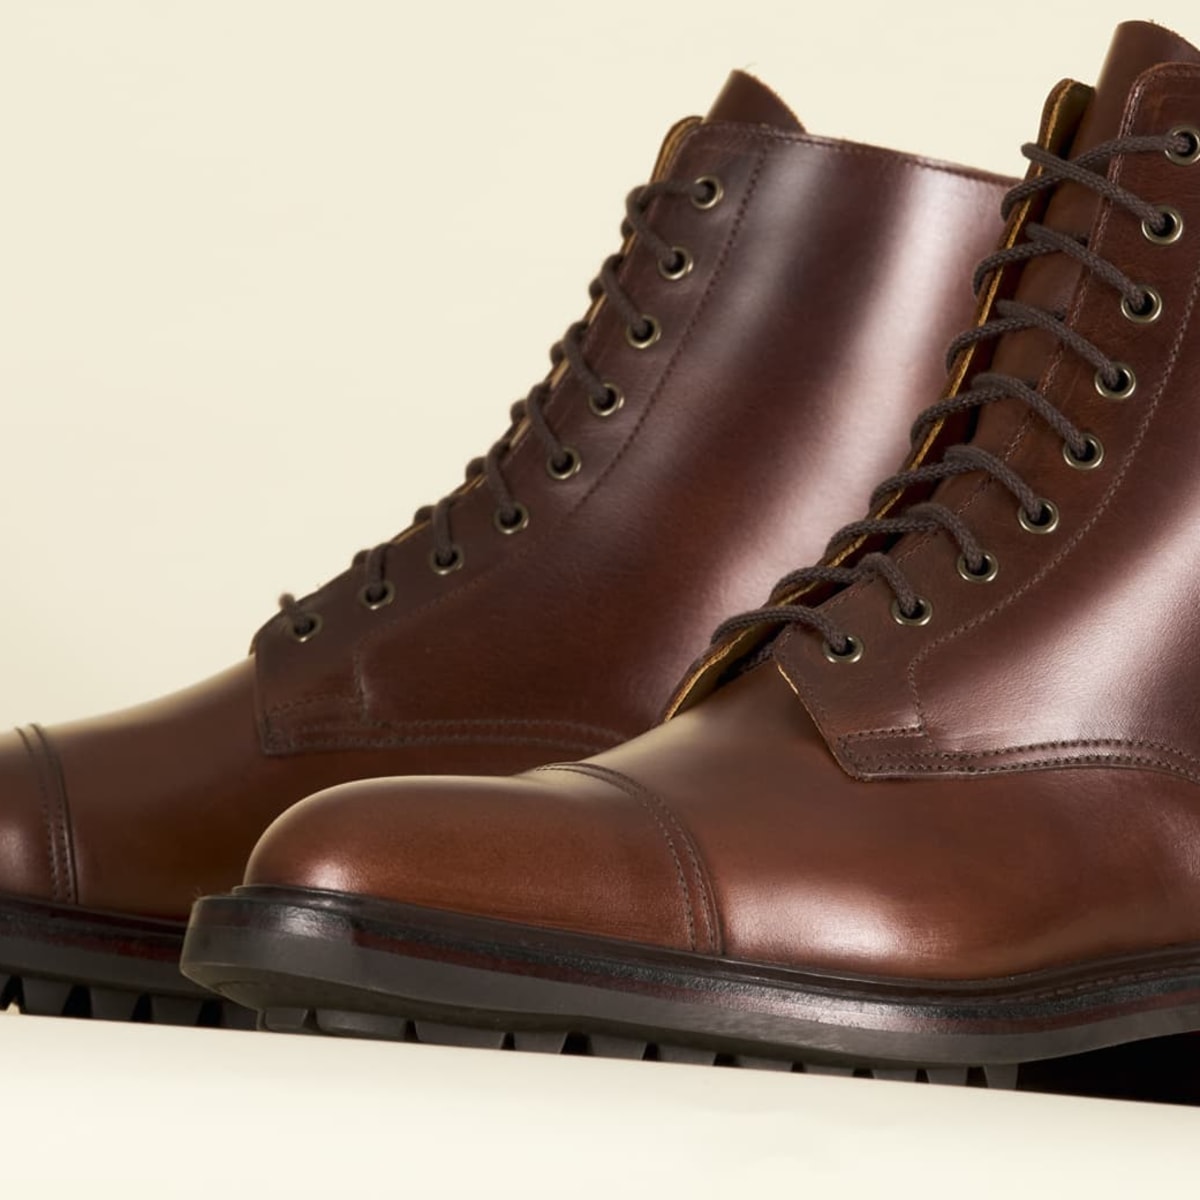 Division Road and Crockett & Jones release two new boots inspired